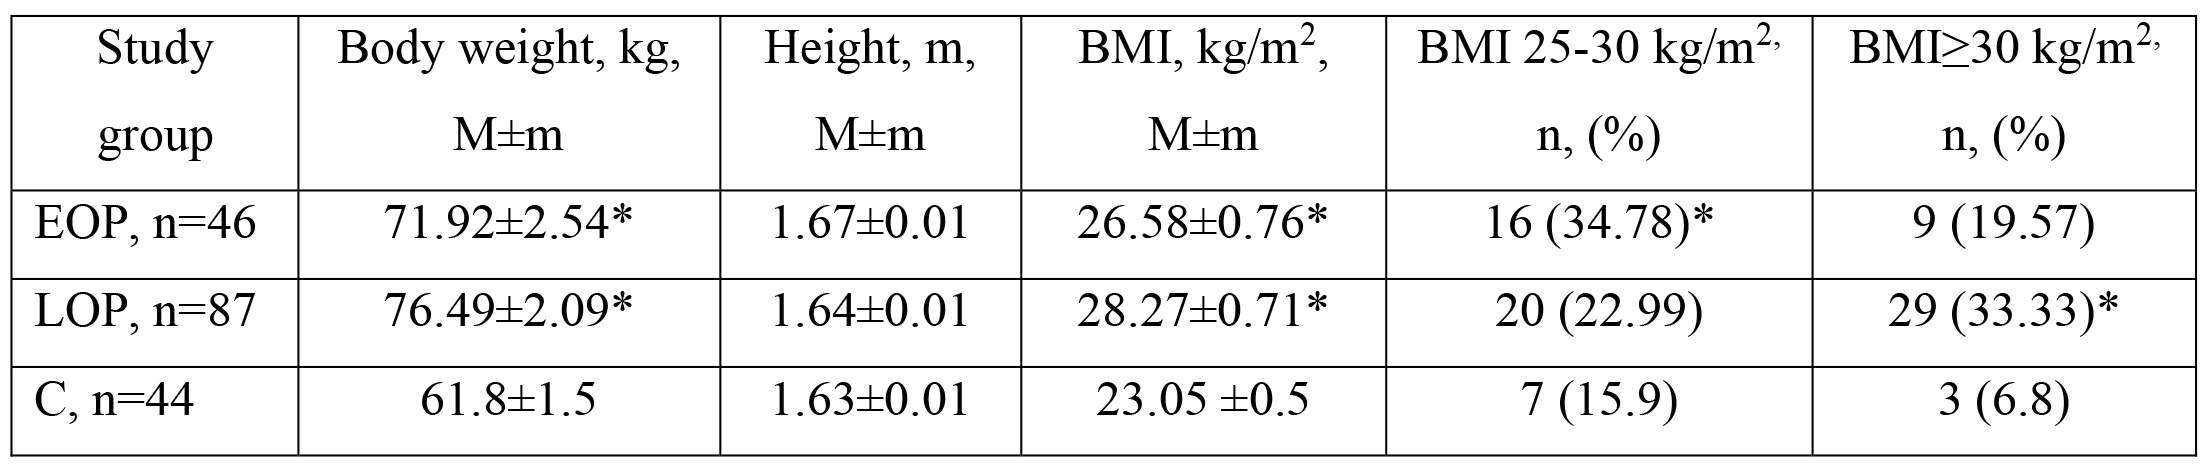 Body mass index, lipid profile, and endothelial dysfunction gene polymorphism in women with early-onset and late-onset preeclampsia